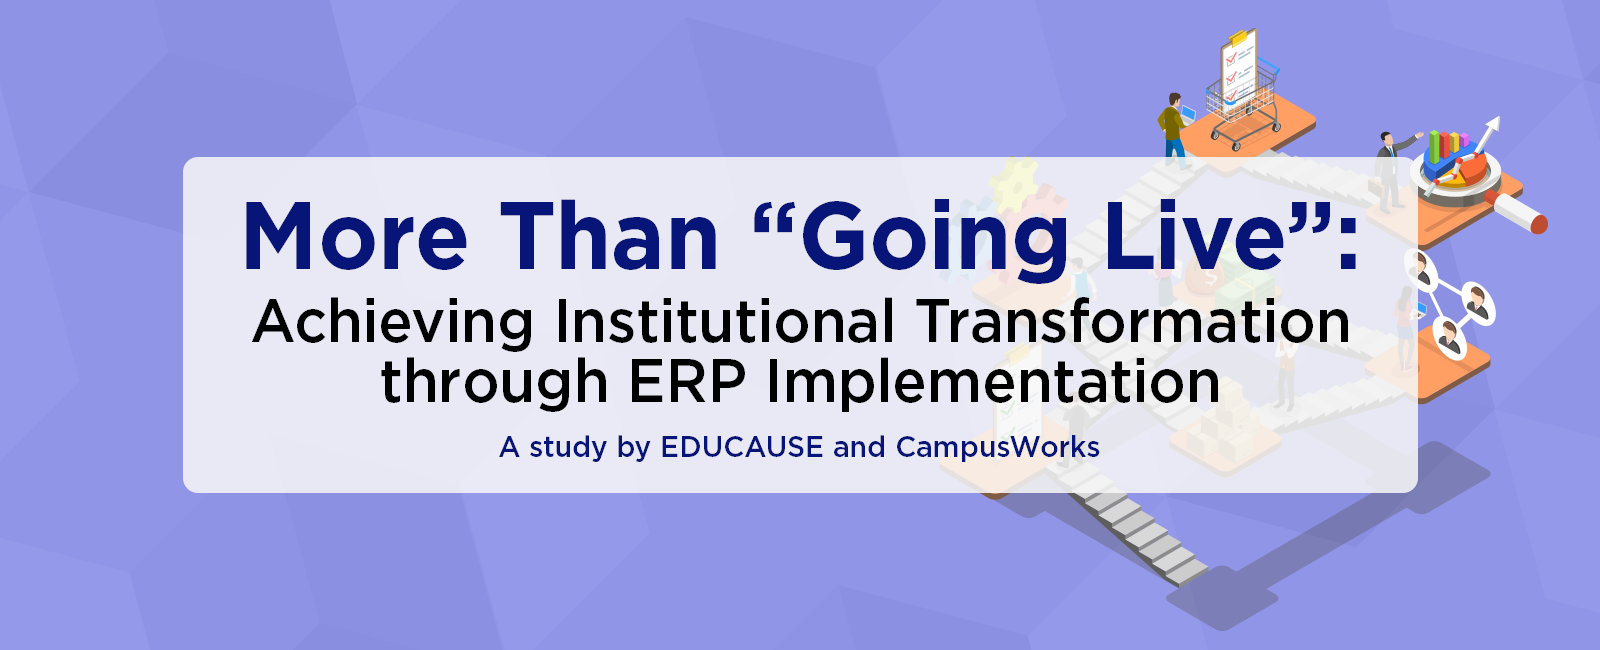 More than “Going Live”: Achieving Institutional Transformation through ERP Implementation